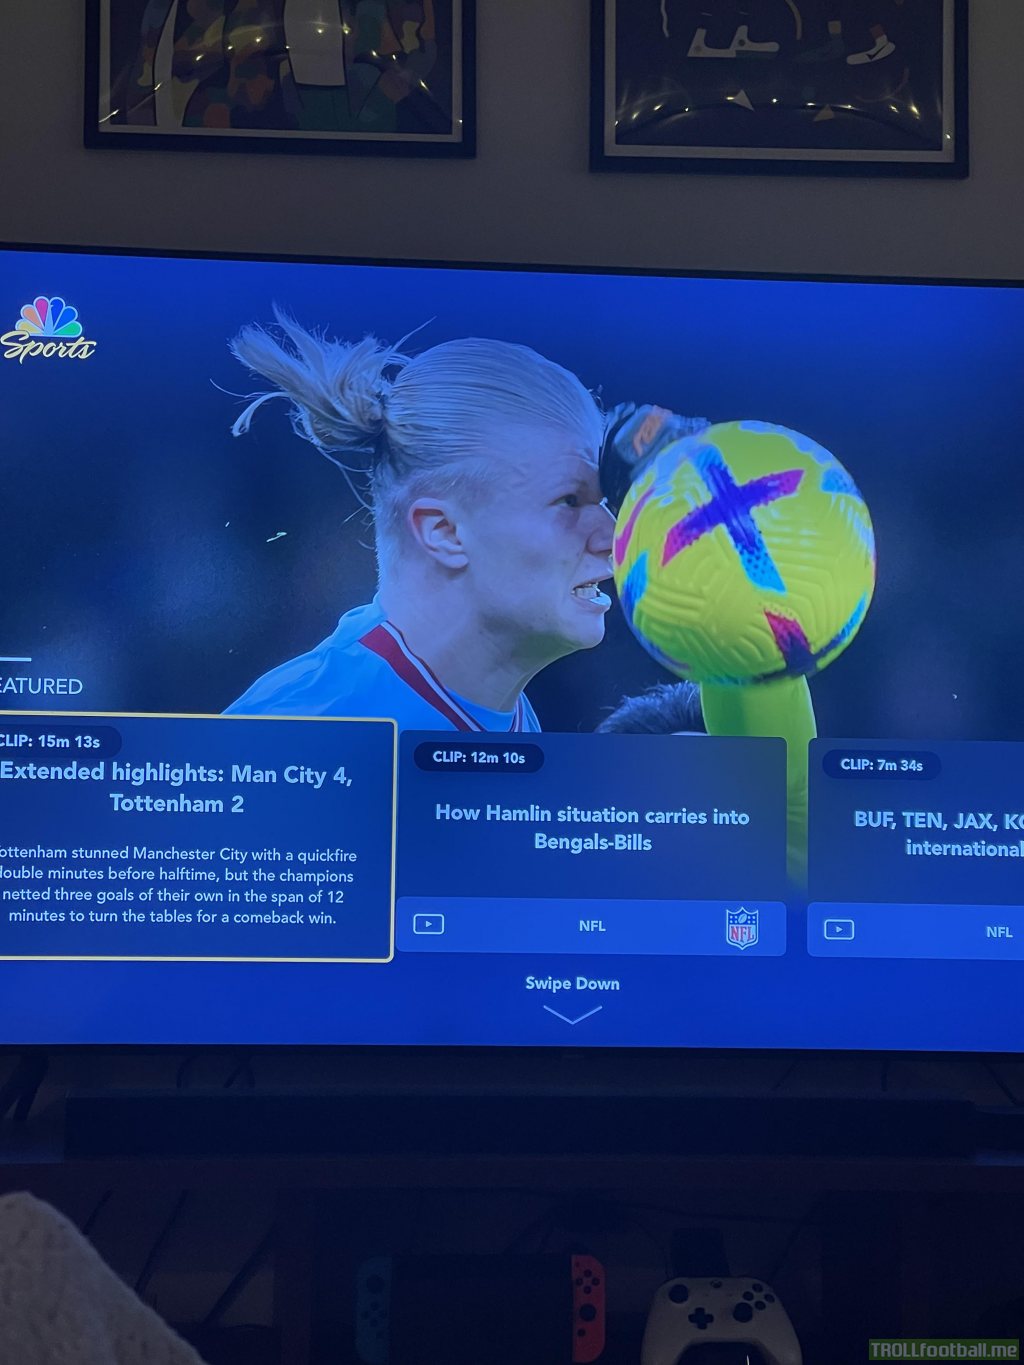 NBC did Haaland dirty with this cover pic for the match highlights lmao